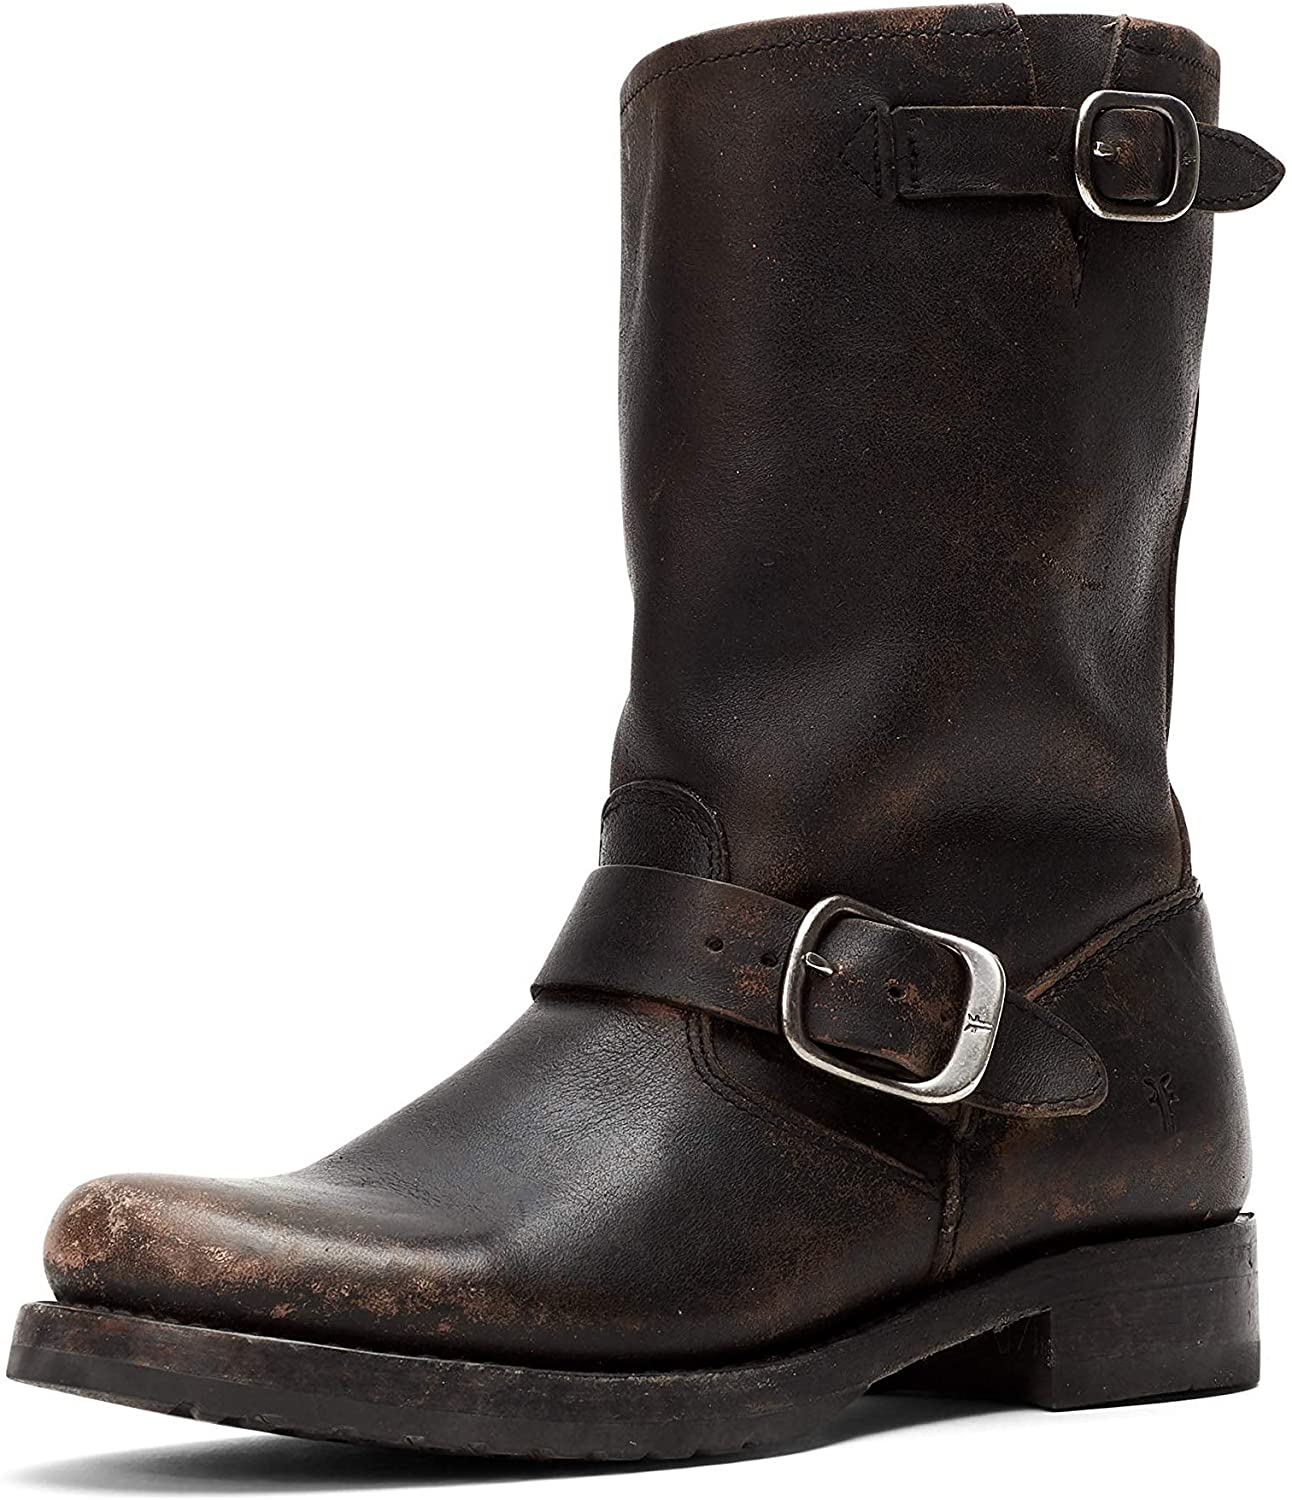 Women's Veronica Short Boot Black from front view